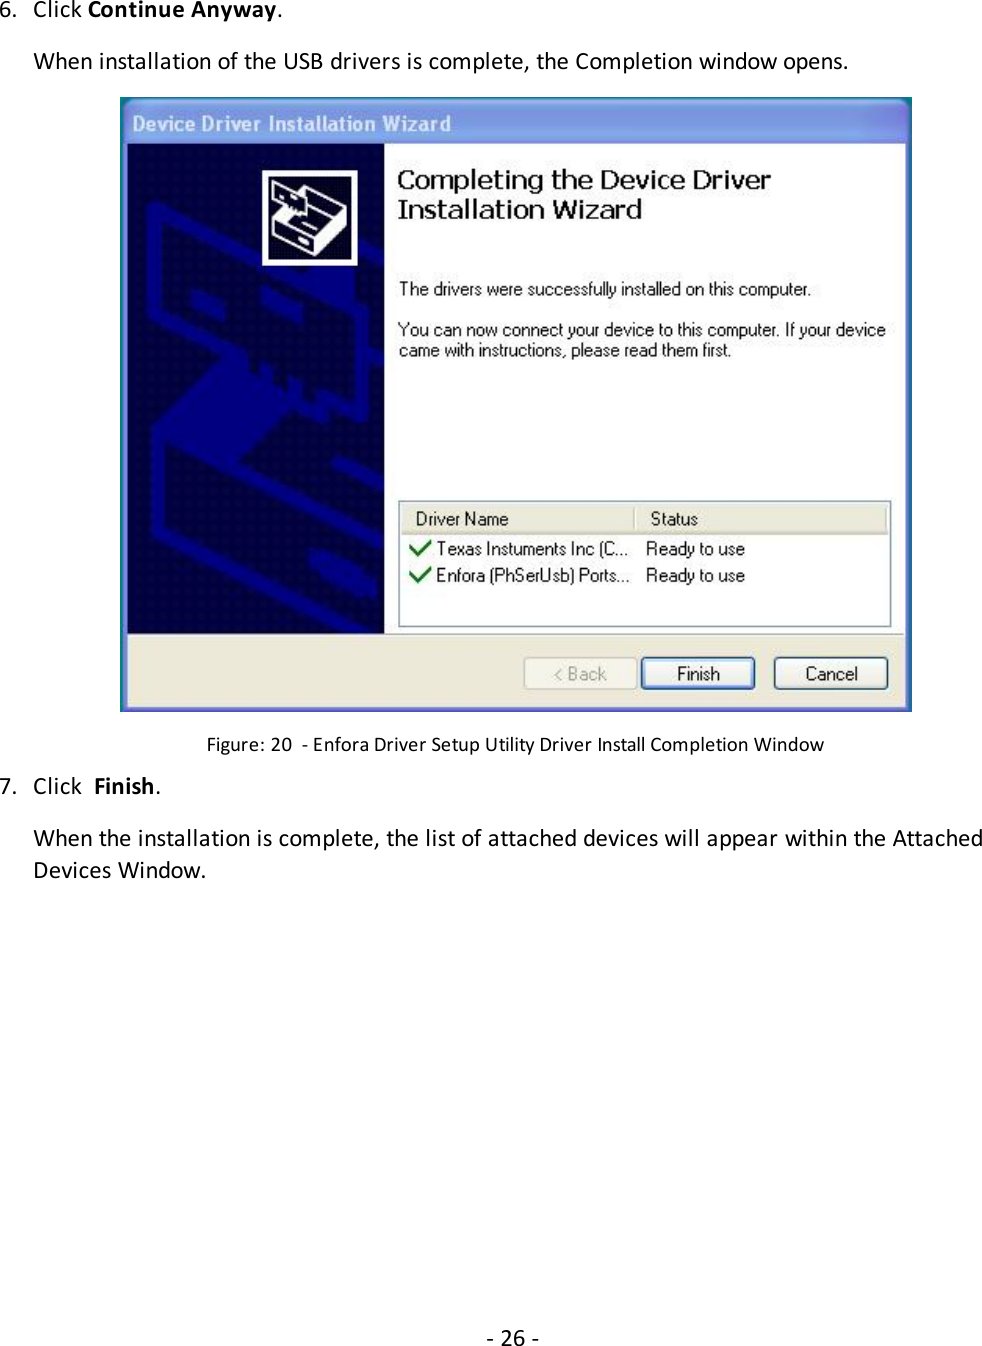 - 26 -6. Click Continue Anyway.When installation of the USB drivers is complete, the Completion window opens.Figure: 20 - Enfora Driver Setup Utility Driver Install Completion Window7. Click Finish.When the installation is complete, the list of attached devices will appear within the AttachedDevices Window.